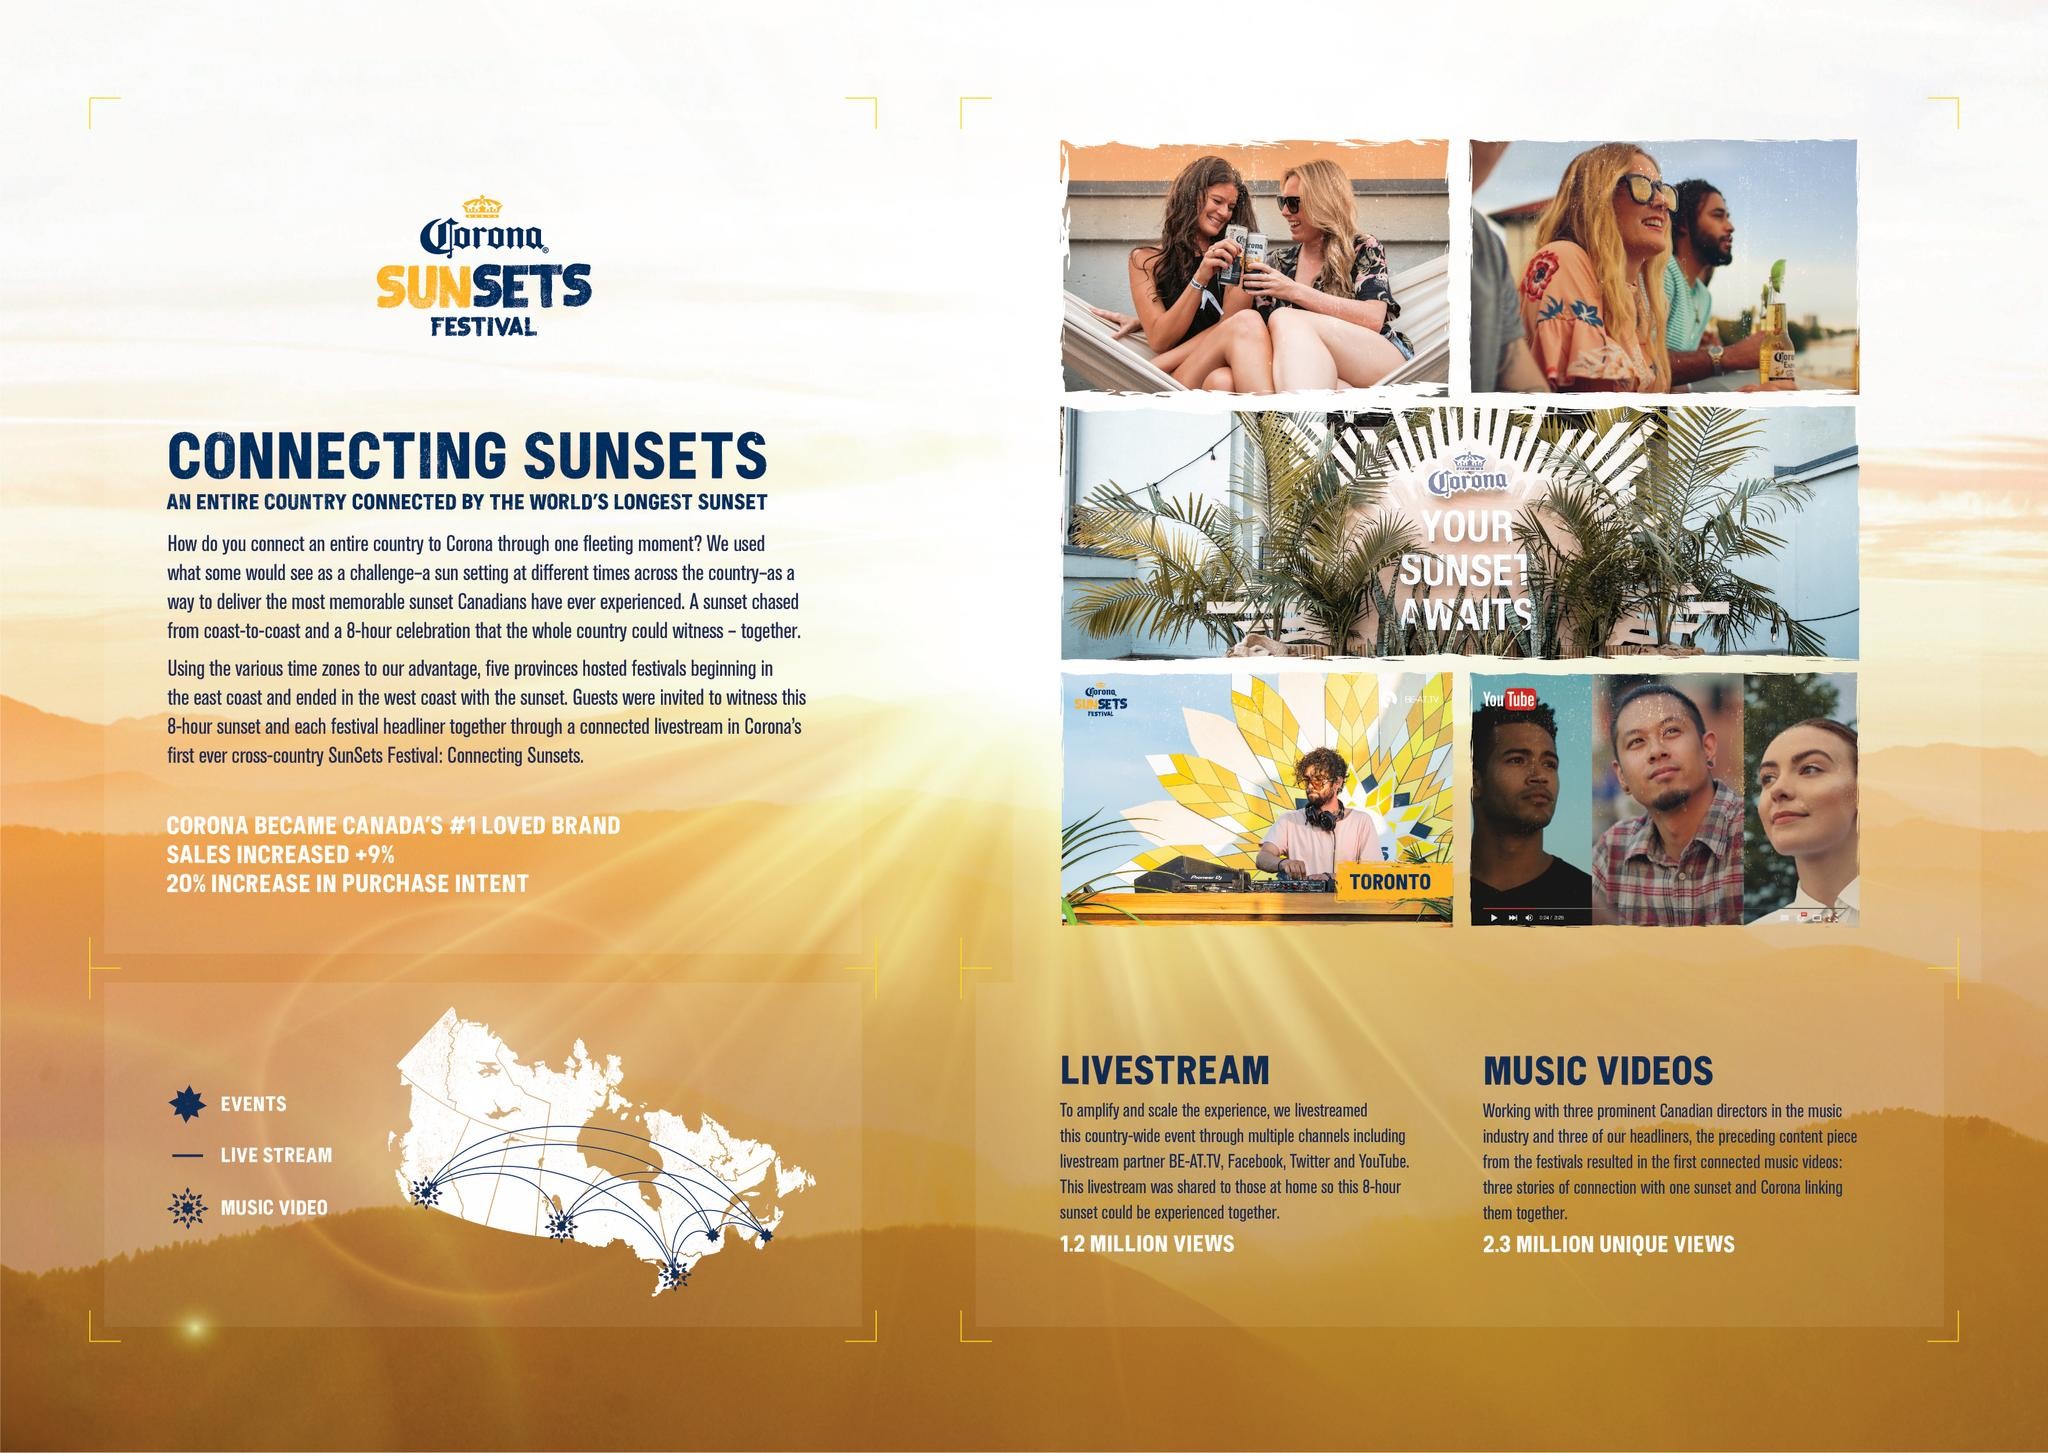 Corona SunSets Festival: Connecting Sunsets